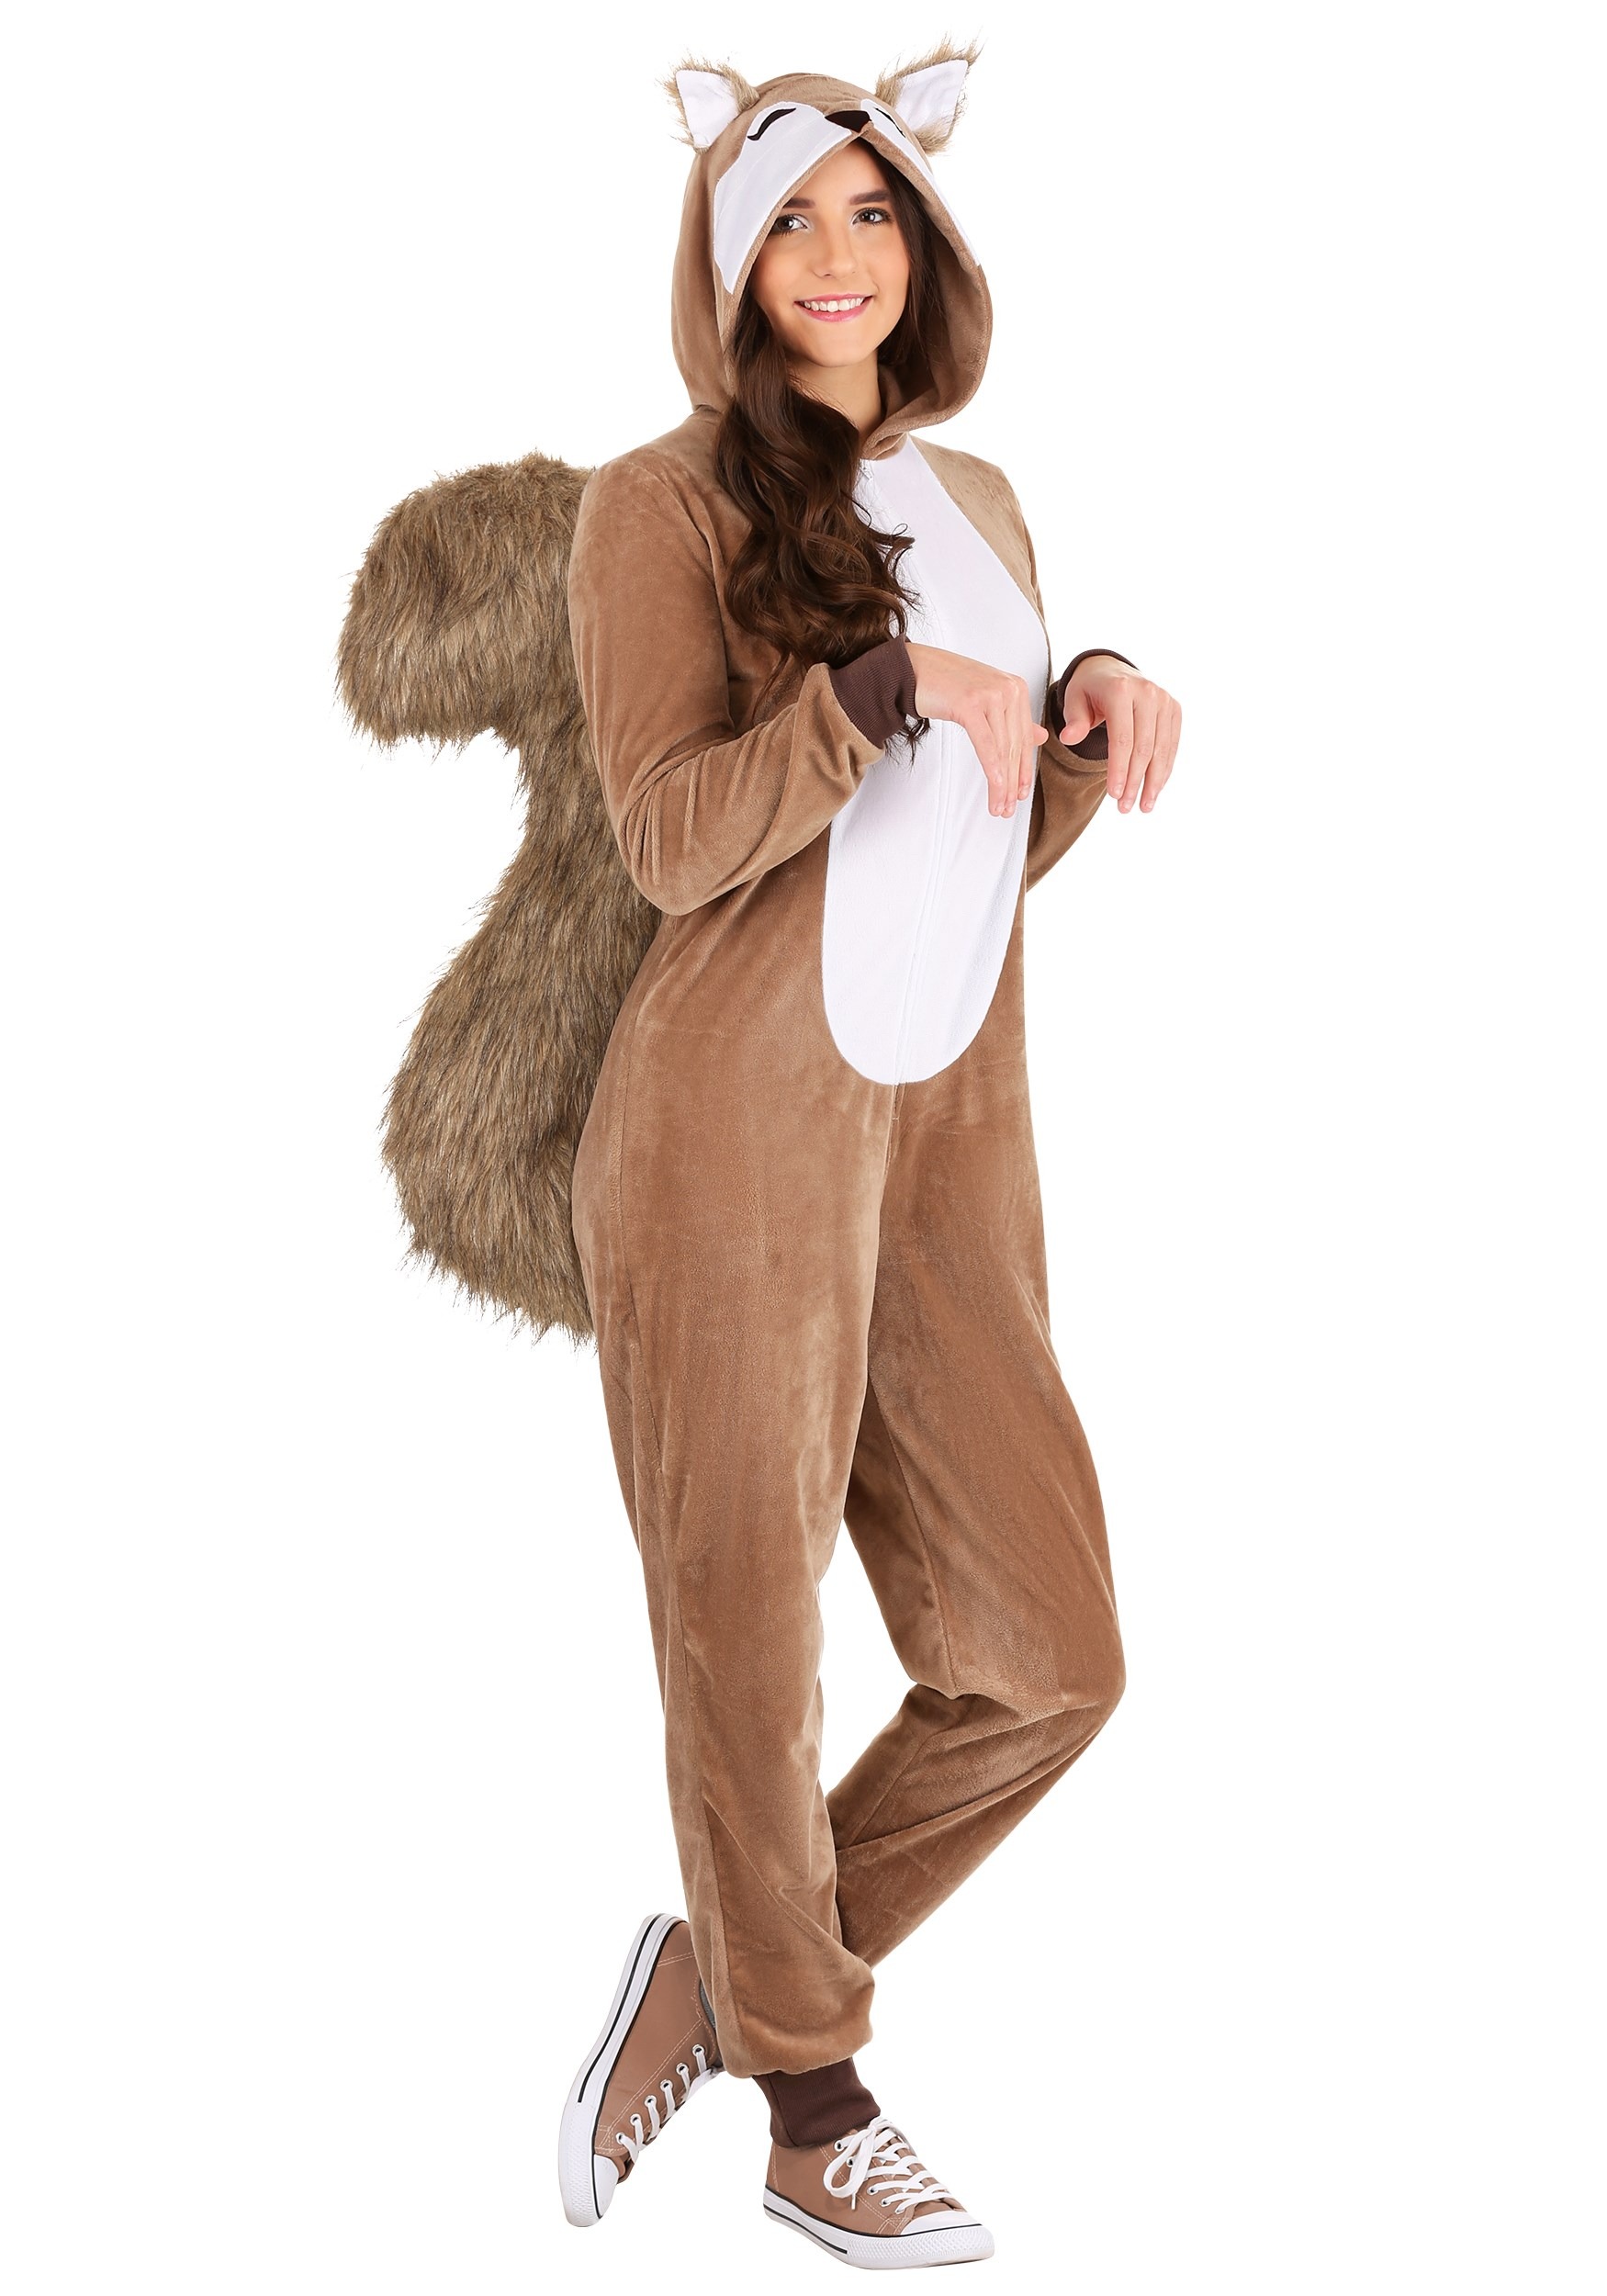 Photos - Fancy Dress FUN Costumes Scampering Women's Squirrel Costume Brown/White FUN1352AD